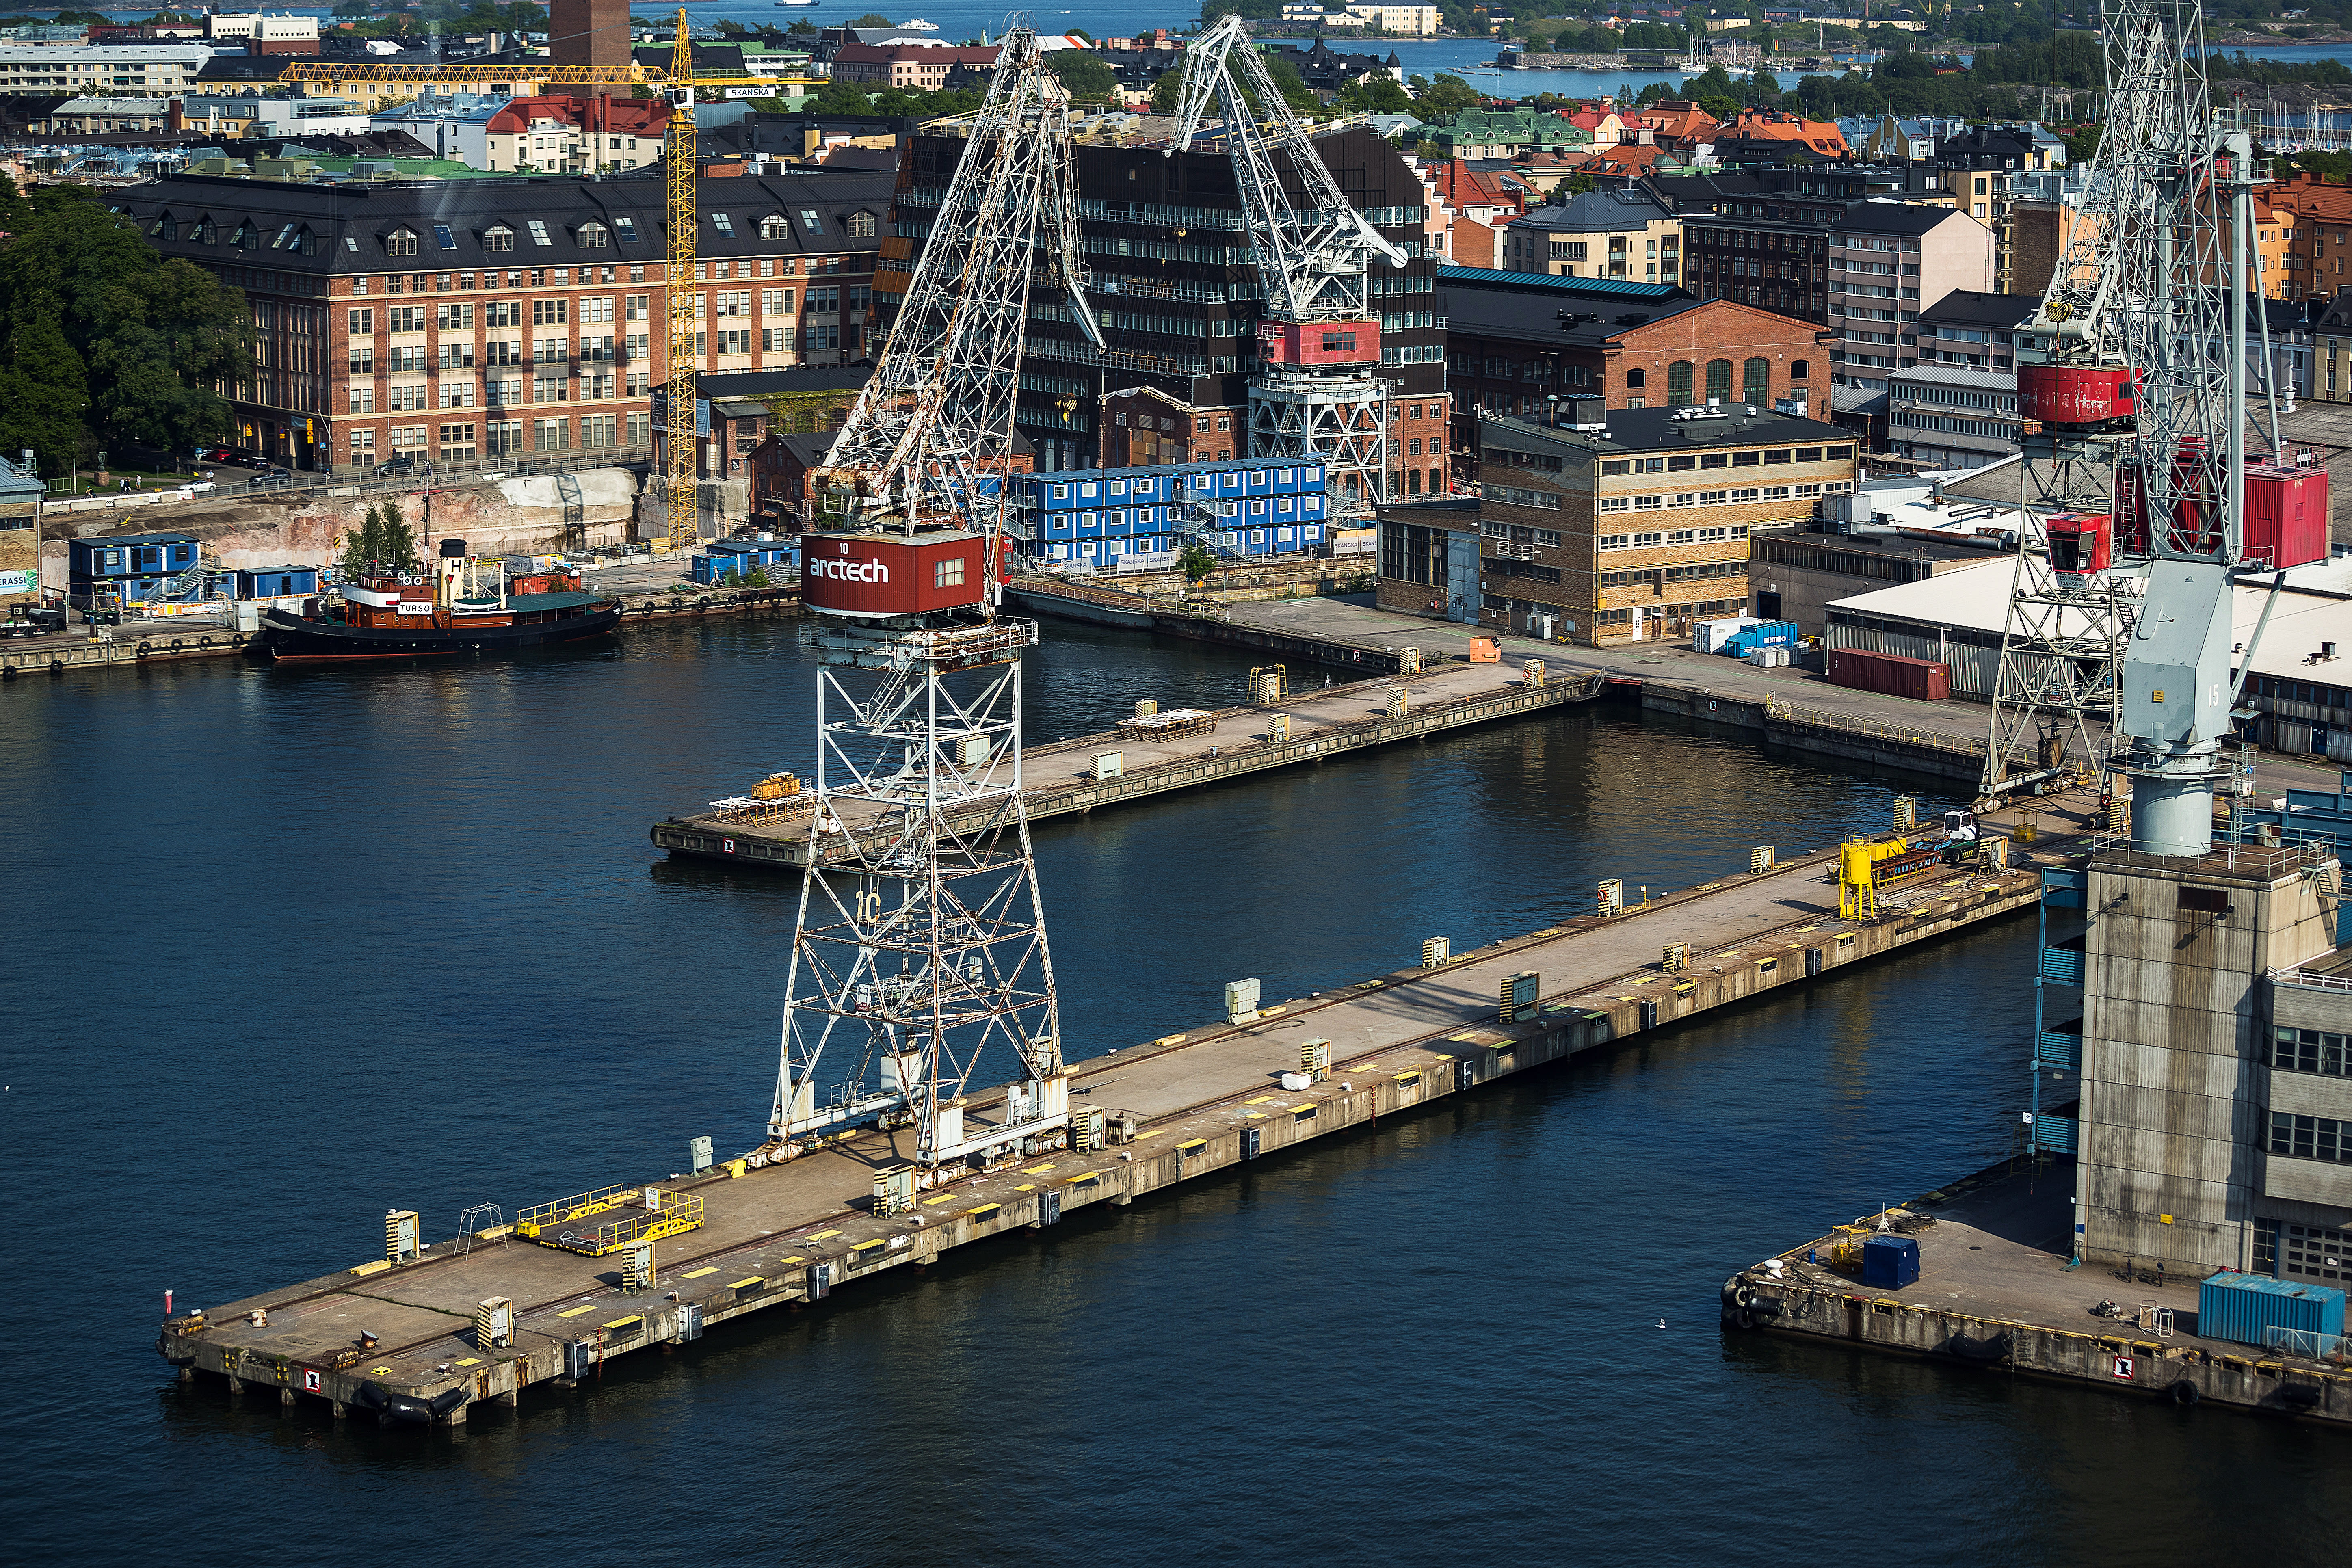 The Russian Helsinki shipyard can cost taxpayers millions